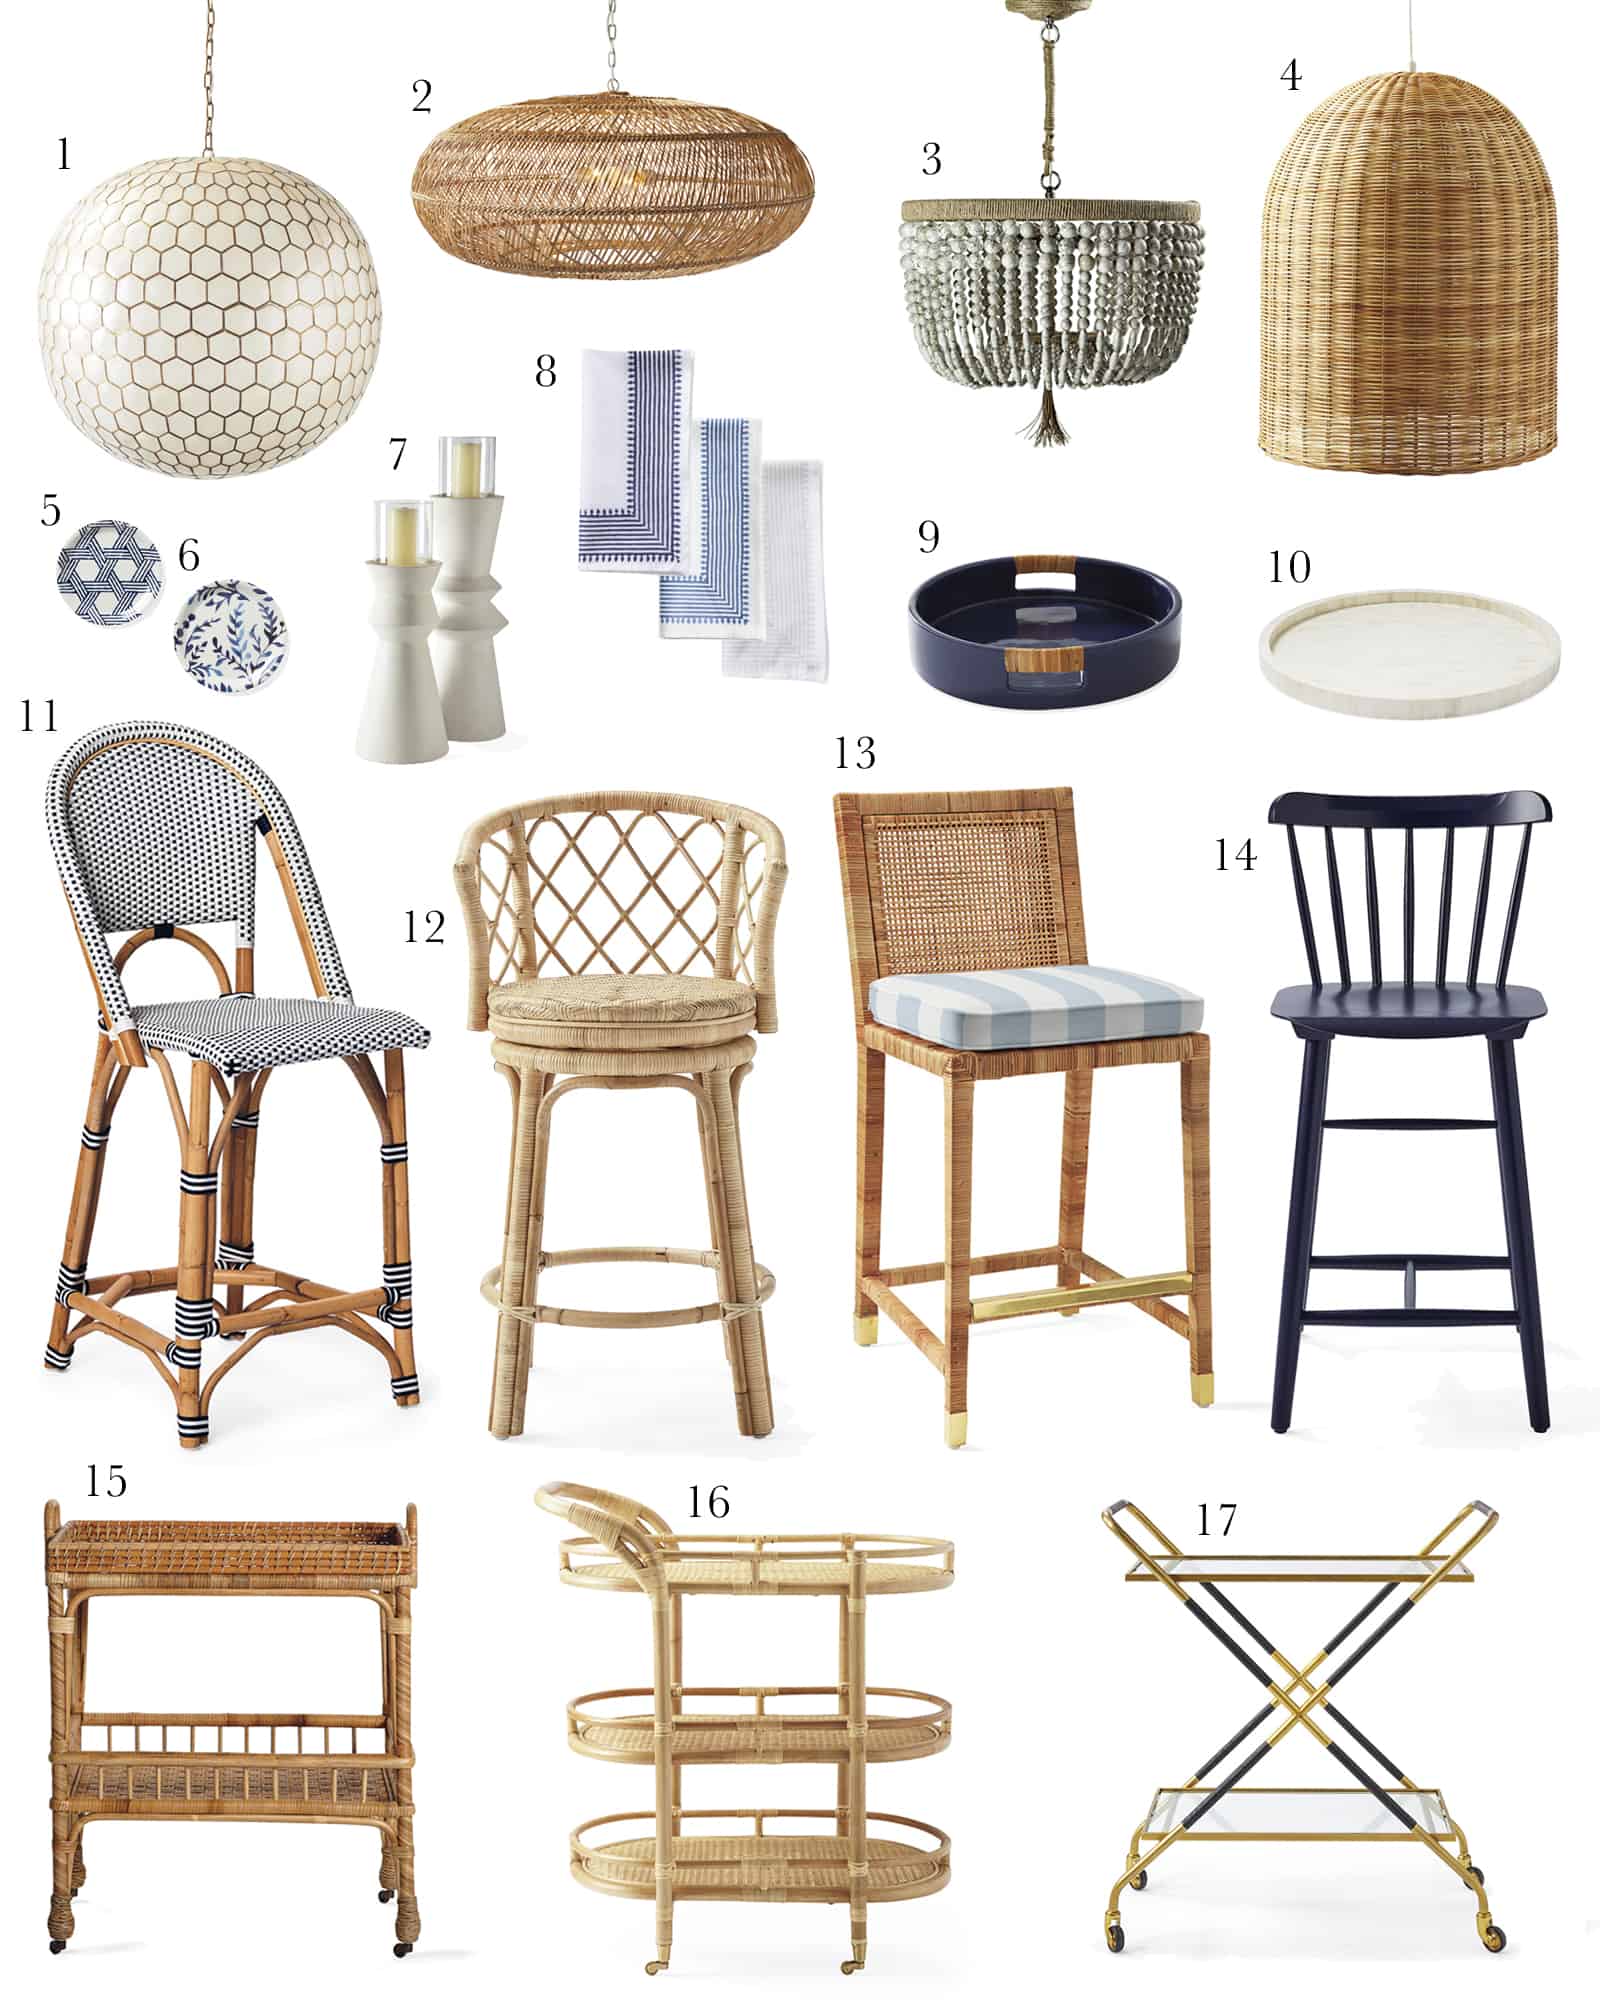 A collage of coastal modern dining room furniture and decor from Serena and Llily